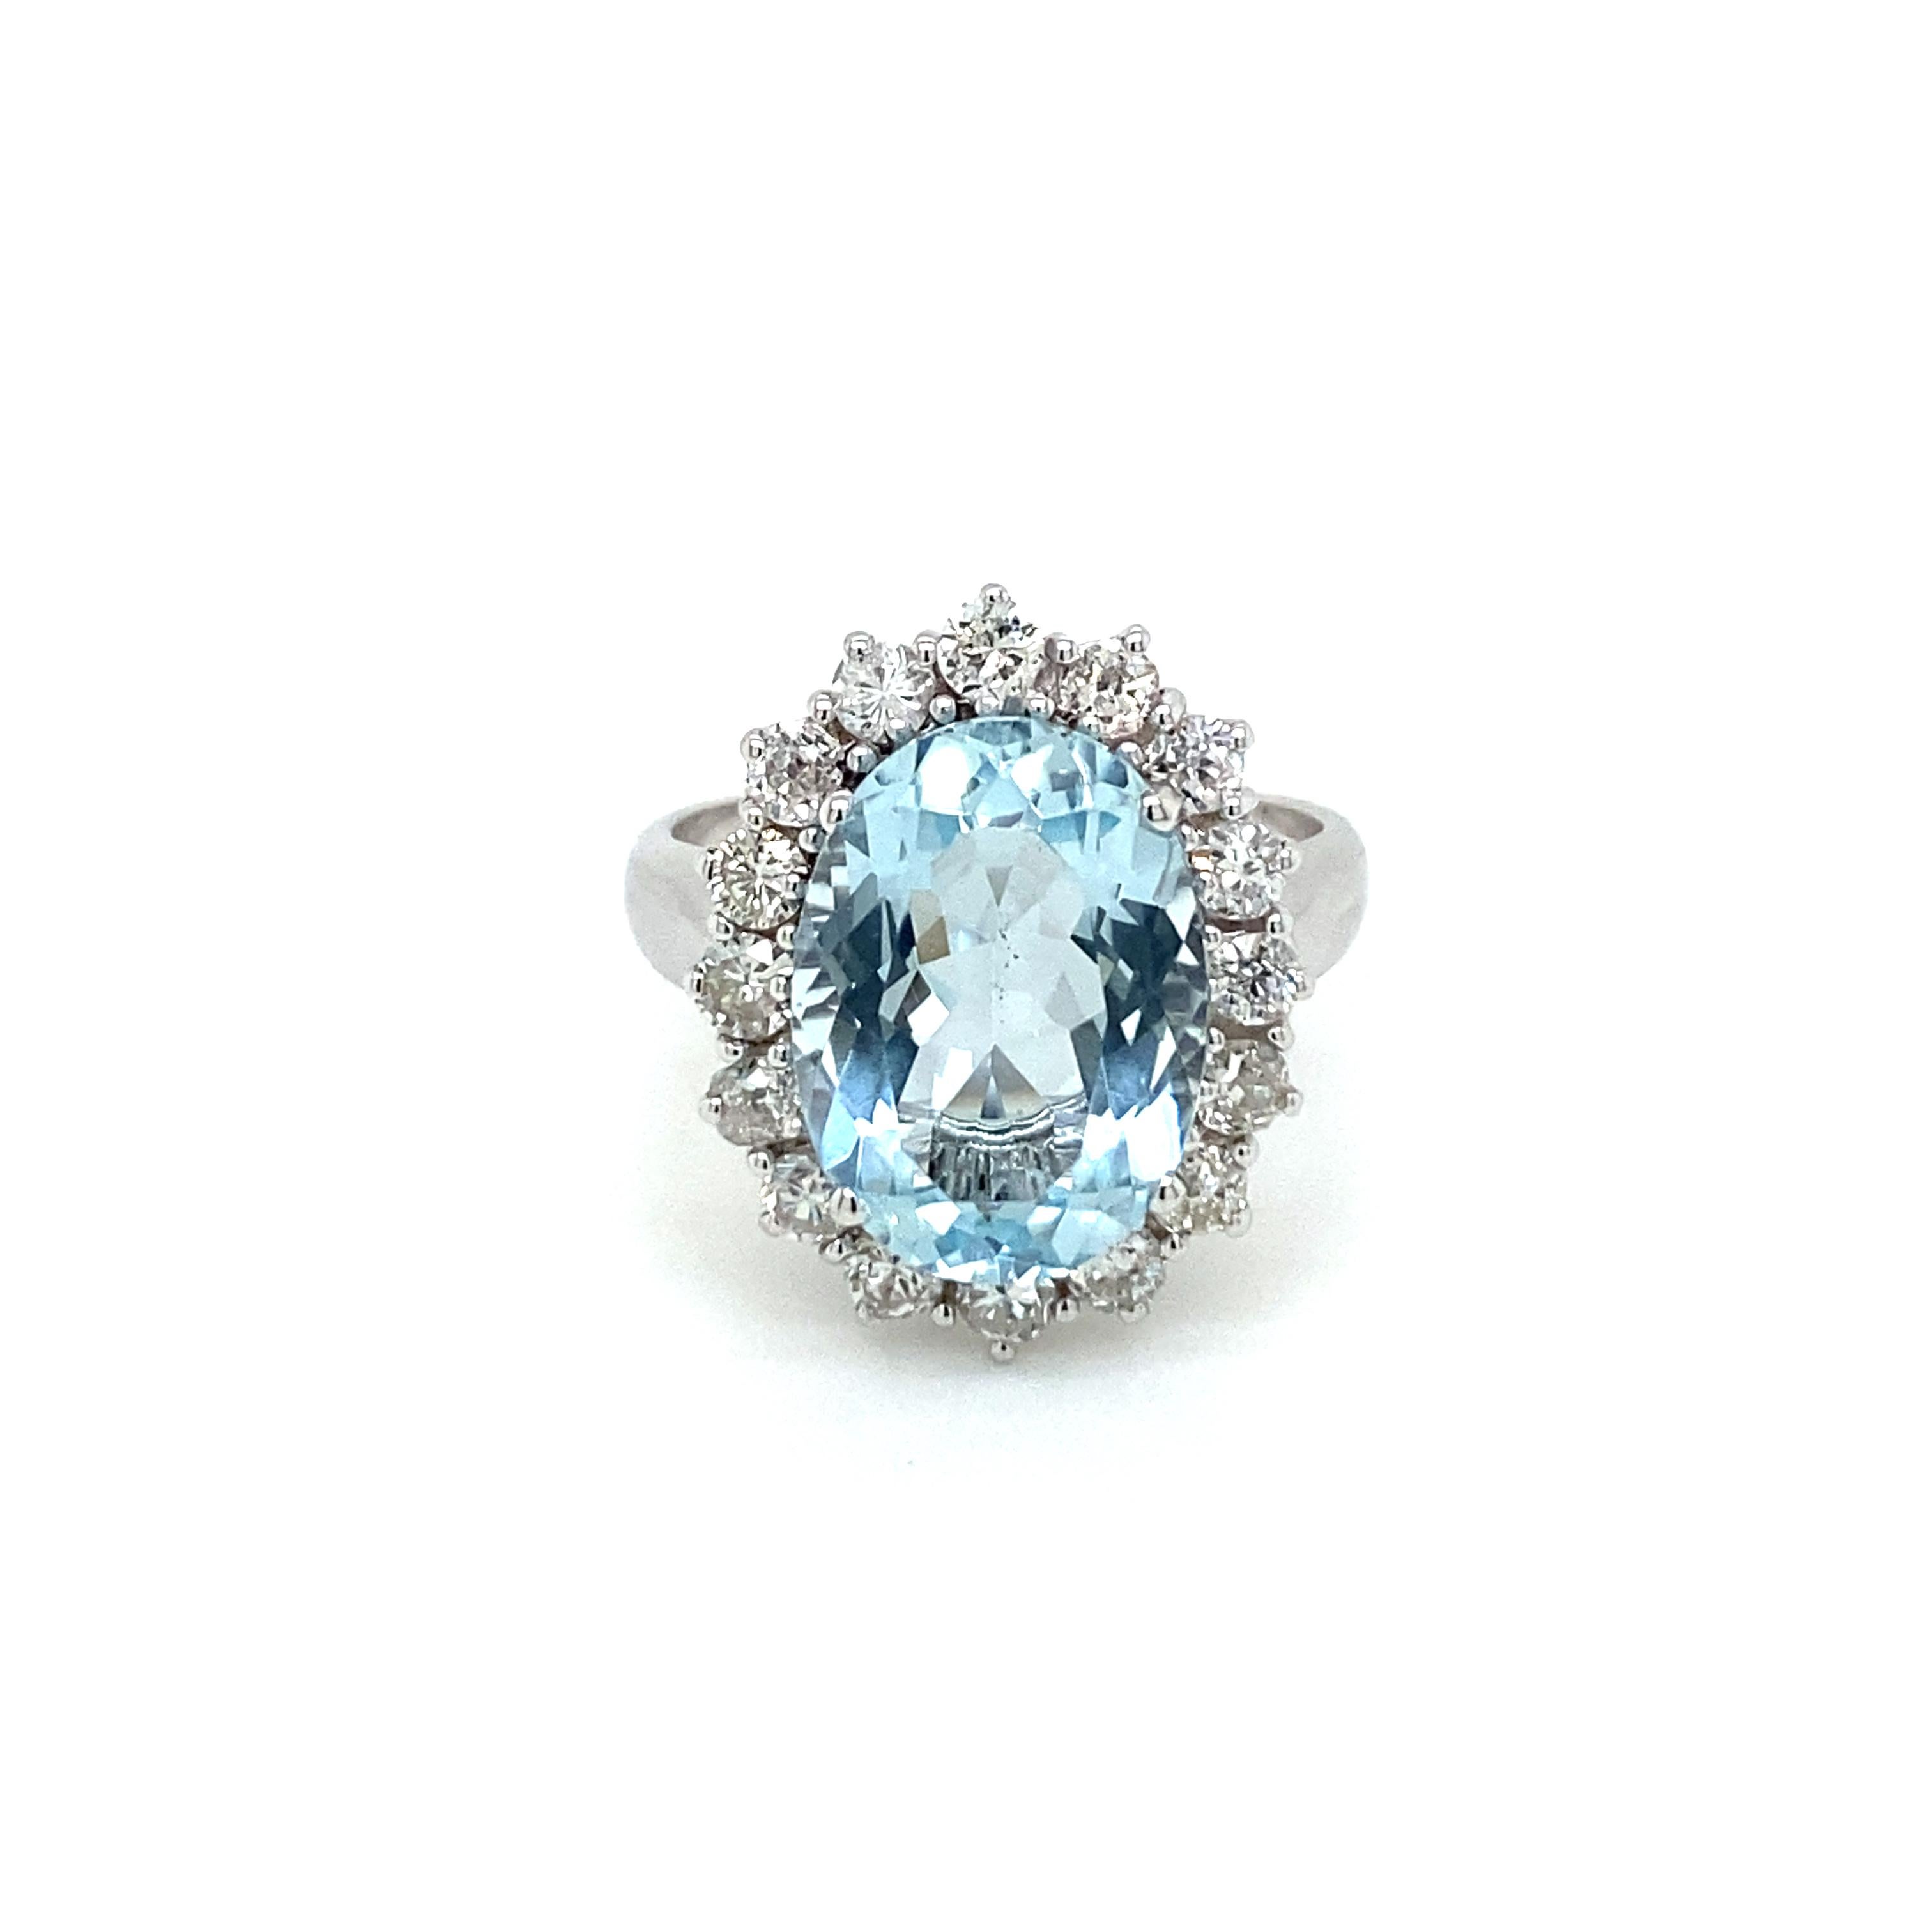 Classy and Beautiful Cluster Ring, handcrafted in 18k white gold. it features a natural and vivid Aquamarine of 5 carats and is surrounded by a sparkling halo composed of round brilliant cut diamonds graded G color Vs1.

CONDITION: Excellent